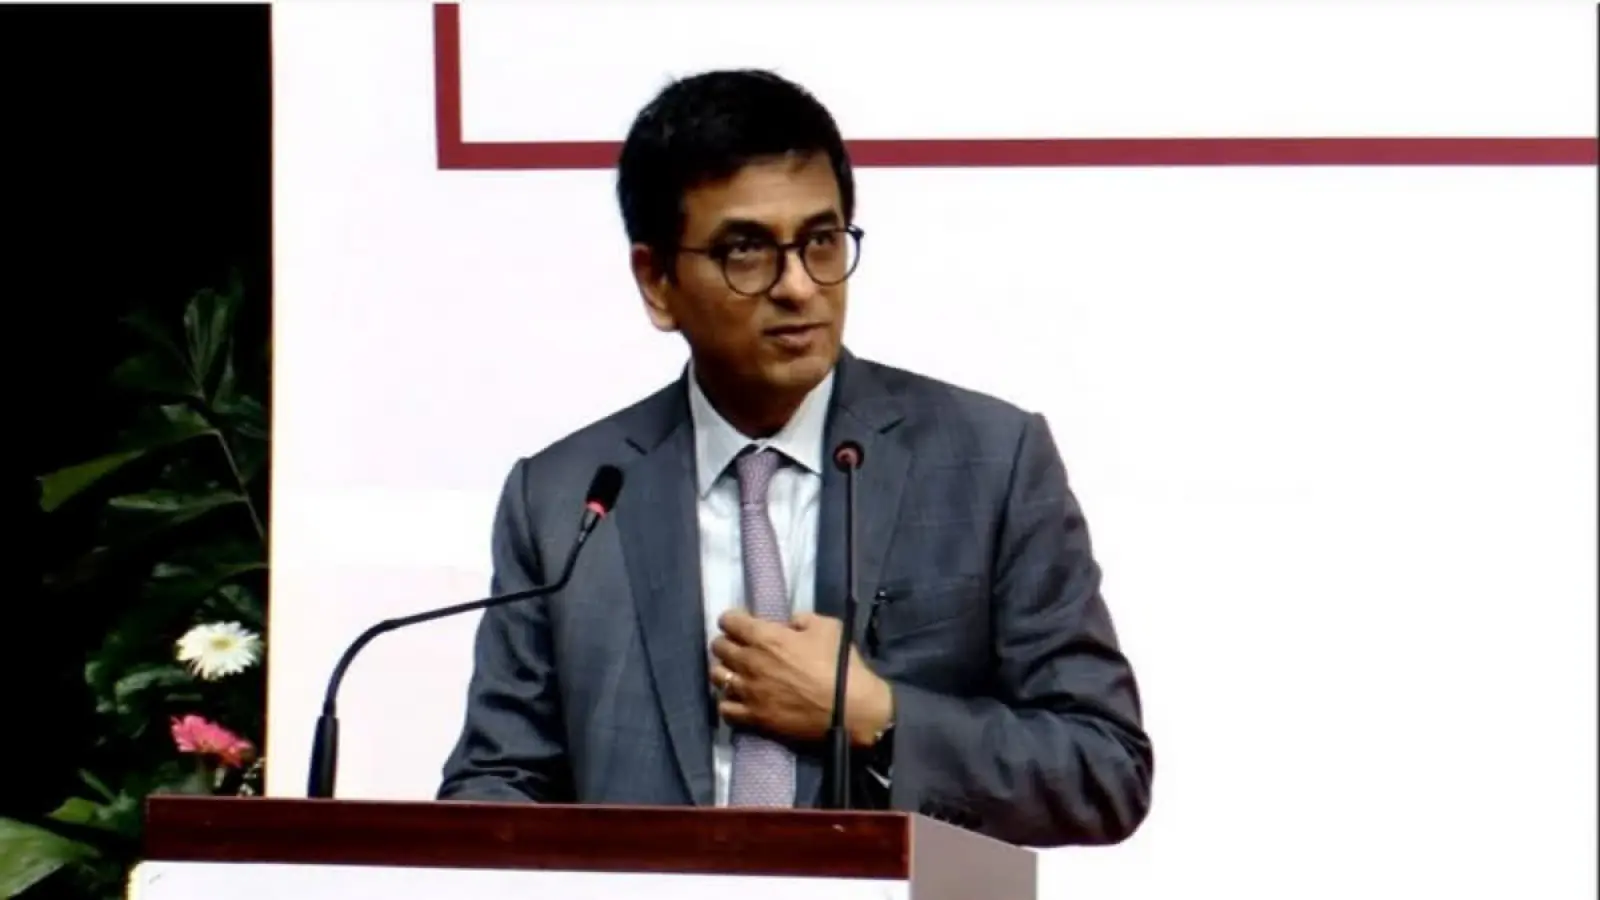 CJI: 'Technology is a strategic step towards democratizing access to justice', says Justice DY Chandrachud